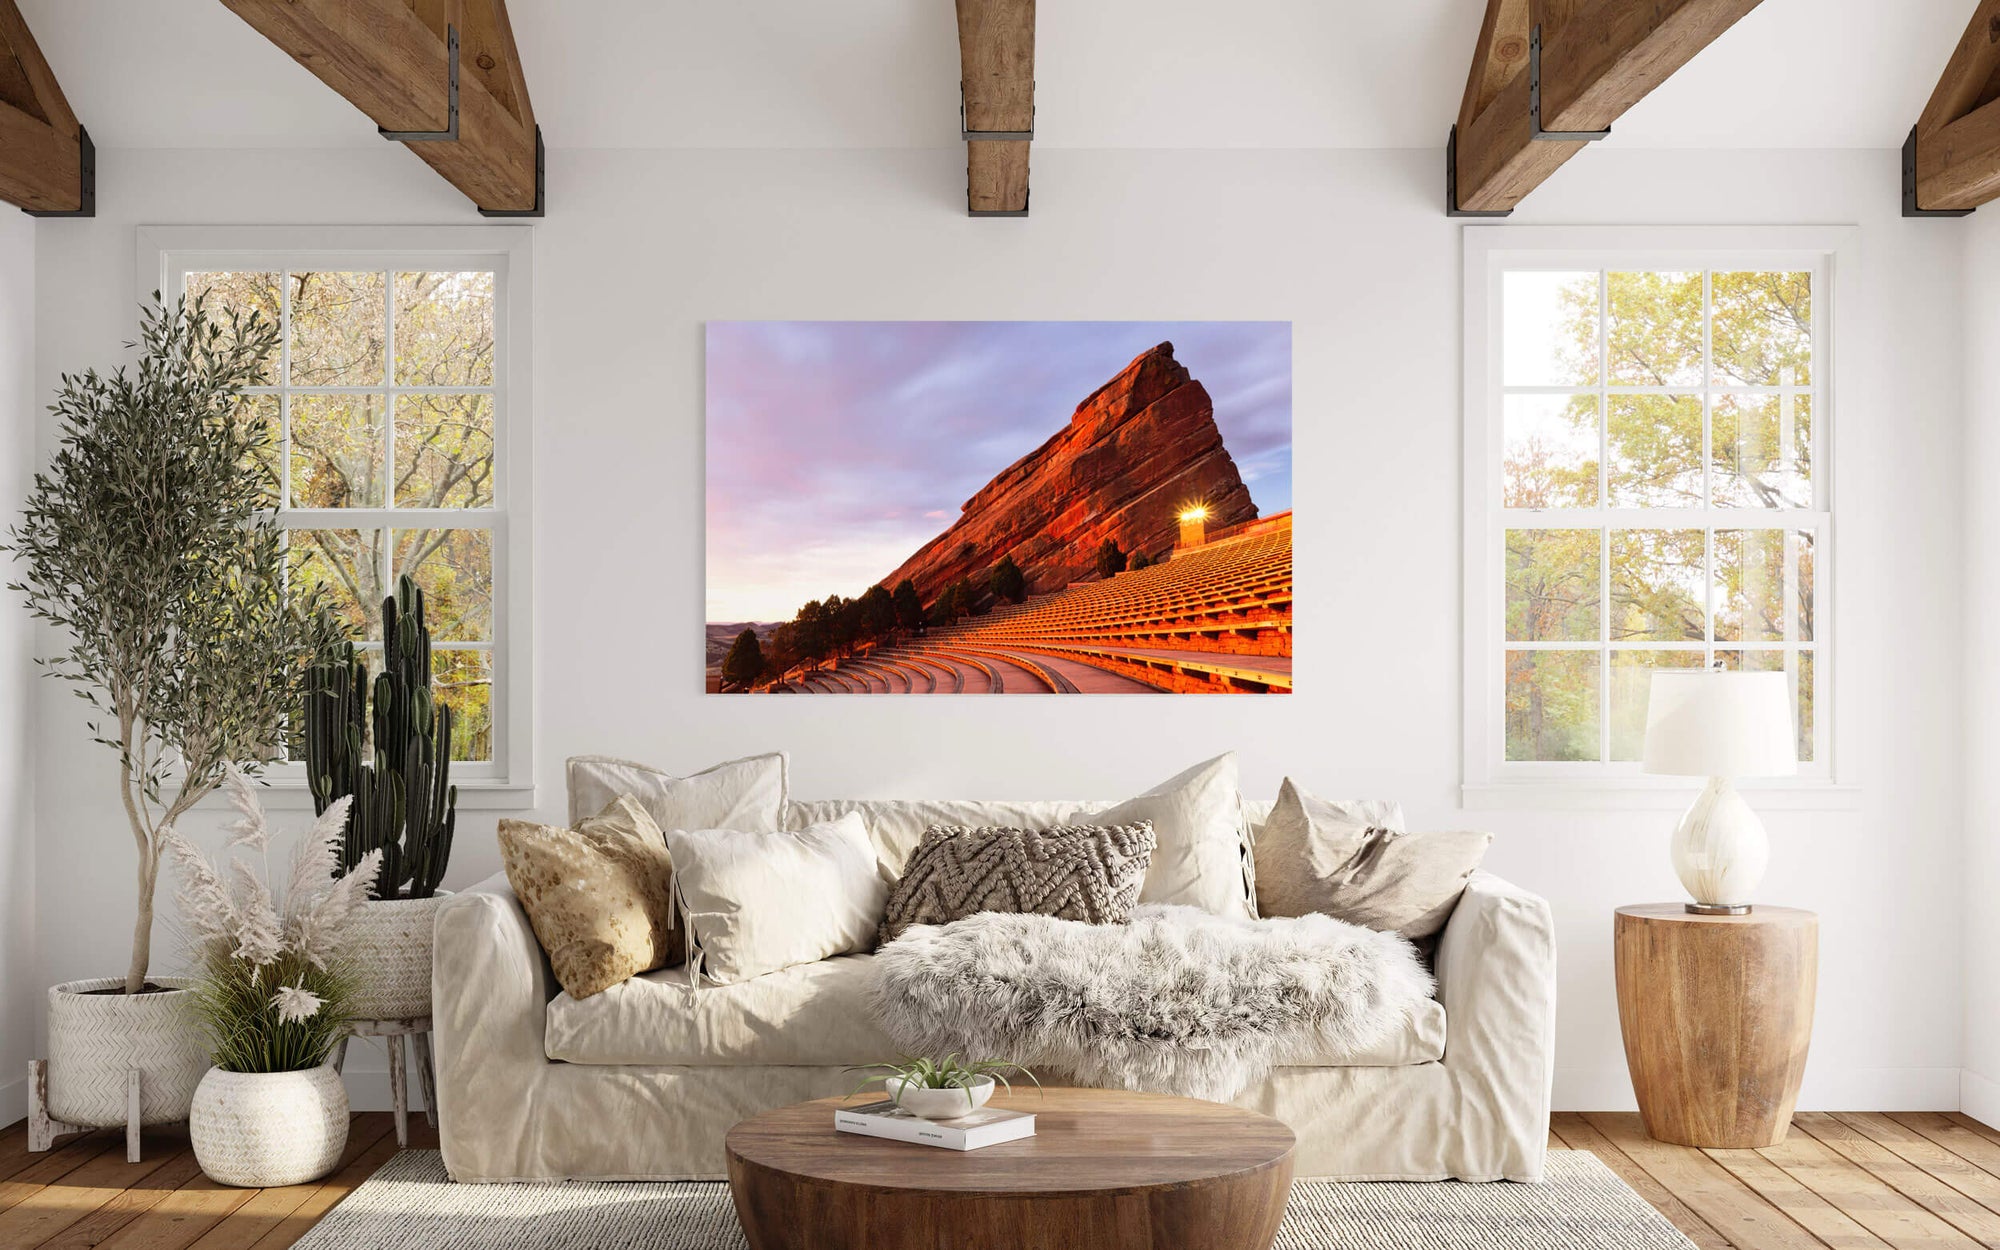 A Red Rocks Amphitheater picture from Denver, Colorado, hangs in a living room.